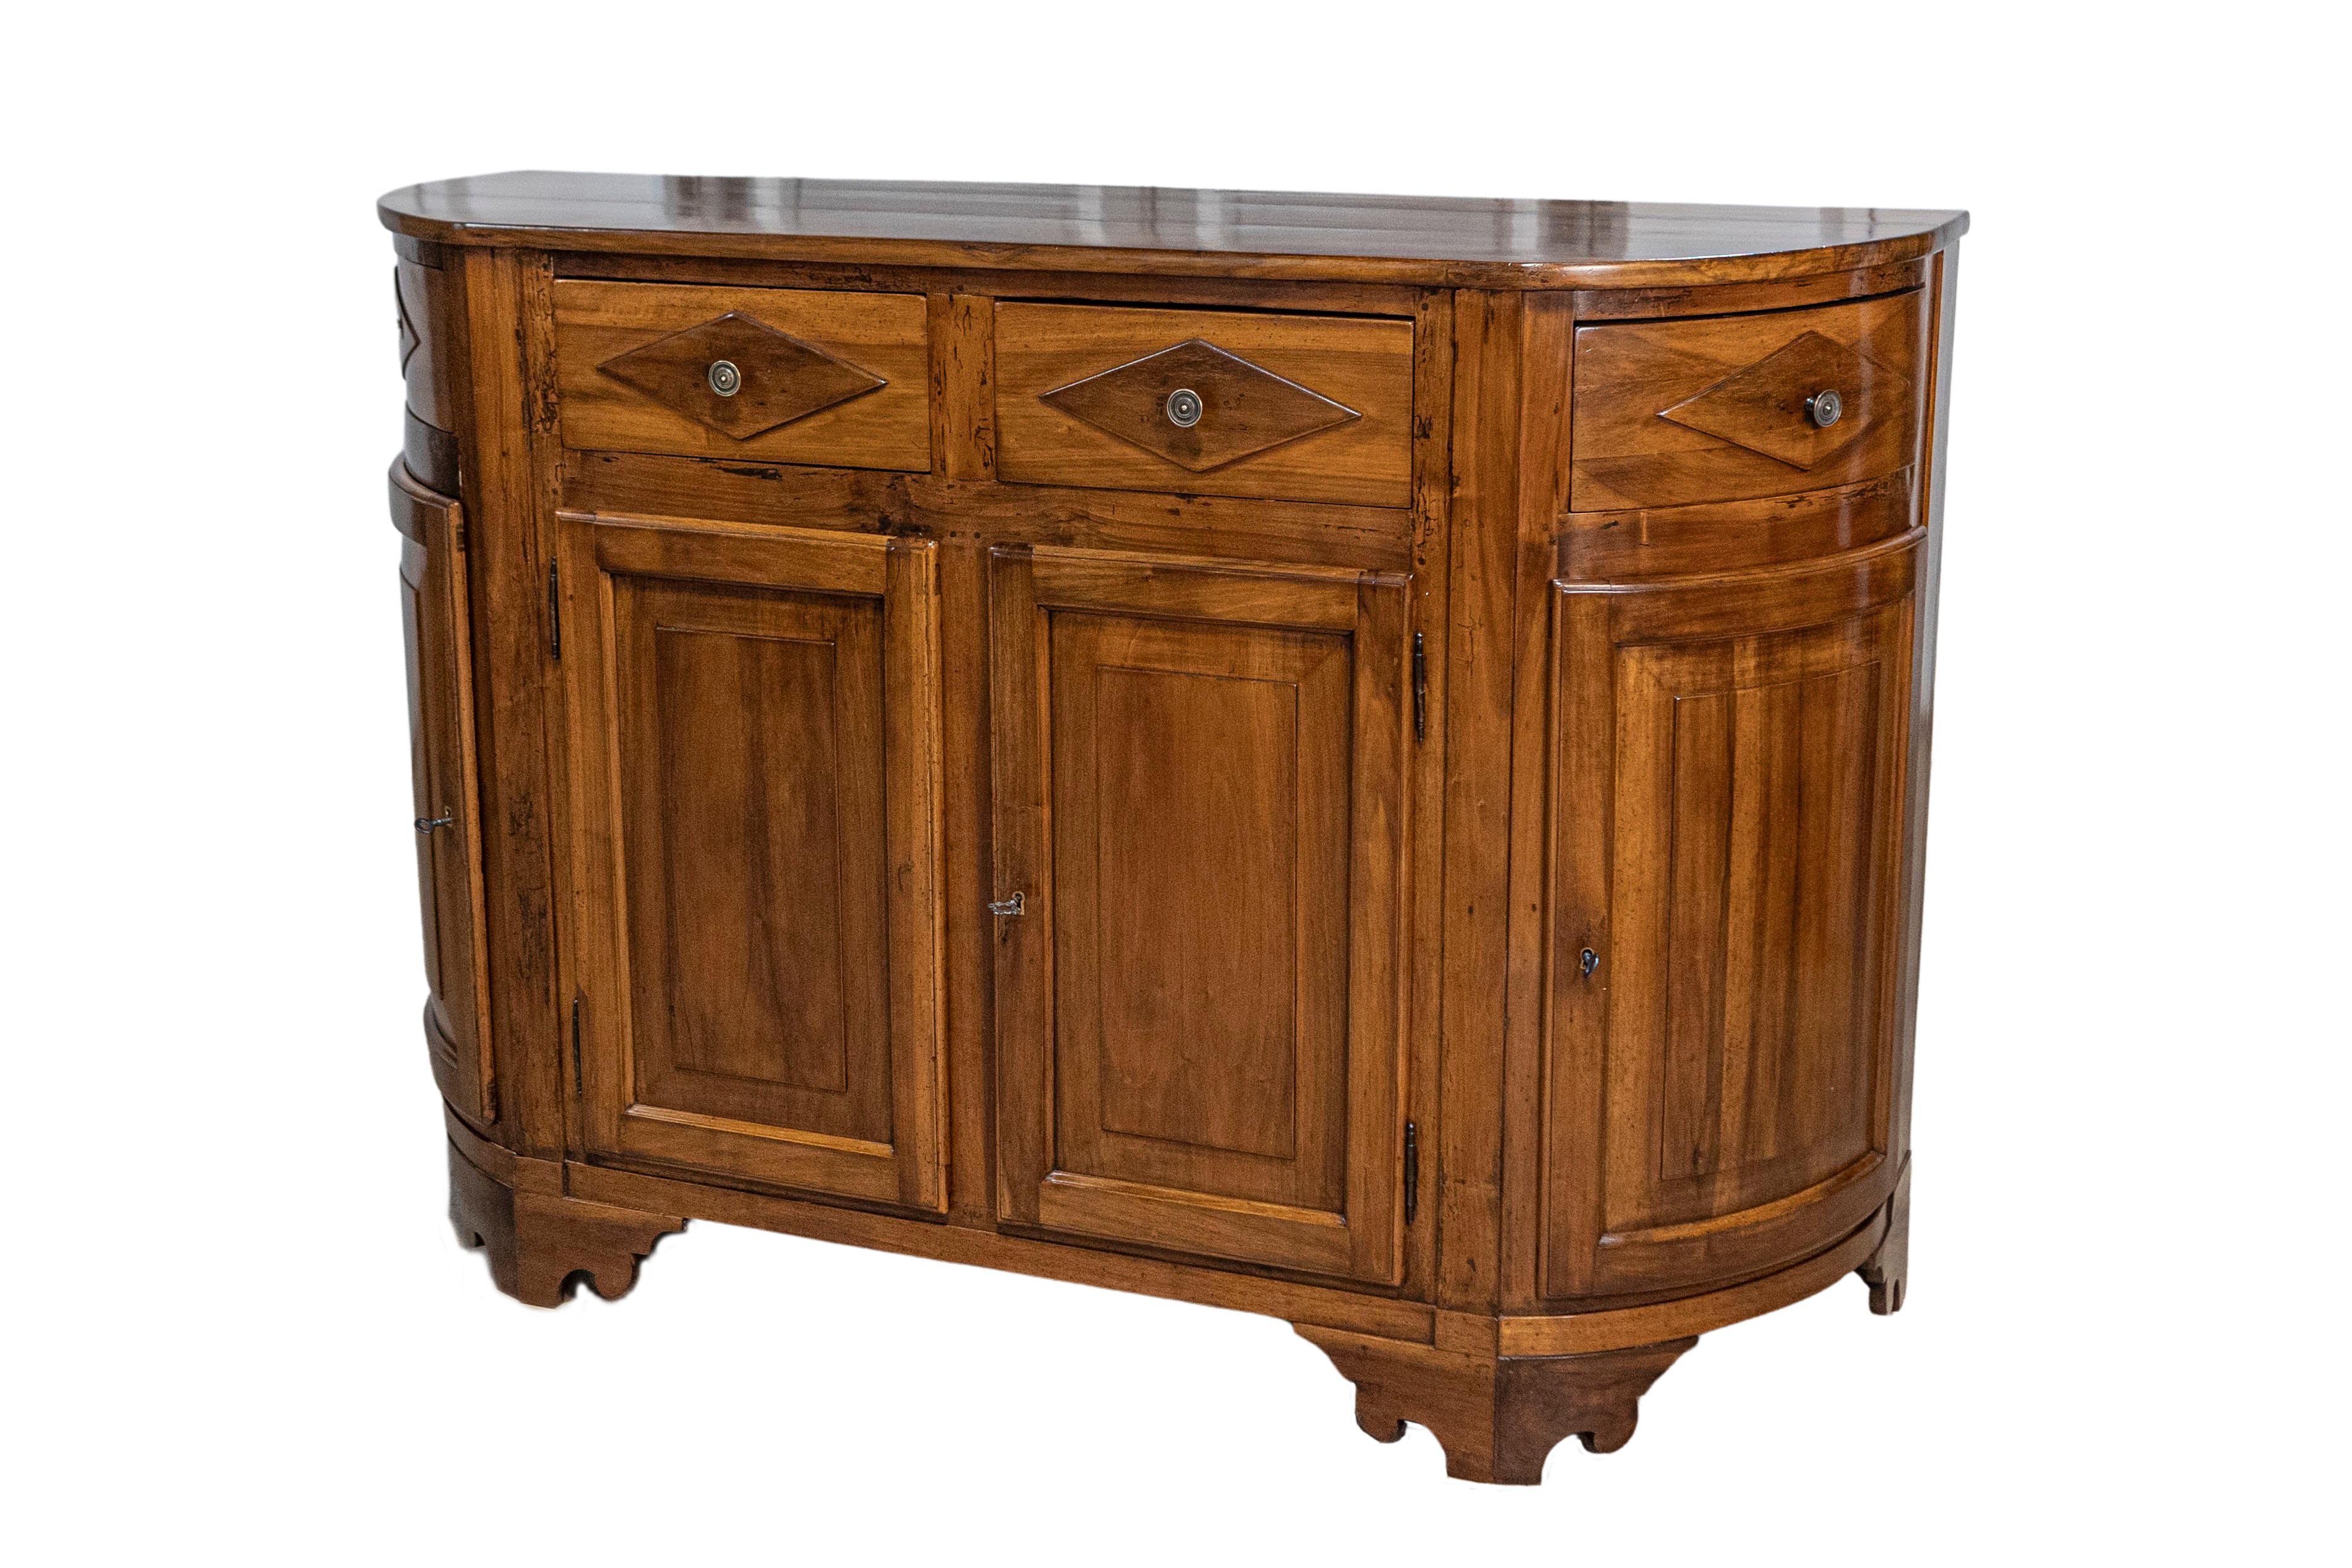 Carved Italian 19th Century Walnut Credenza with Diamond Motifs and Rounded Sides For Sale